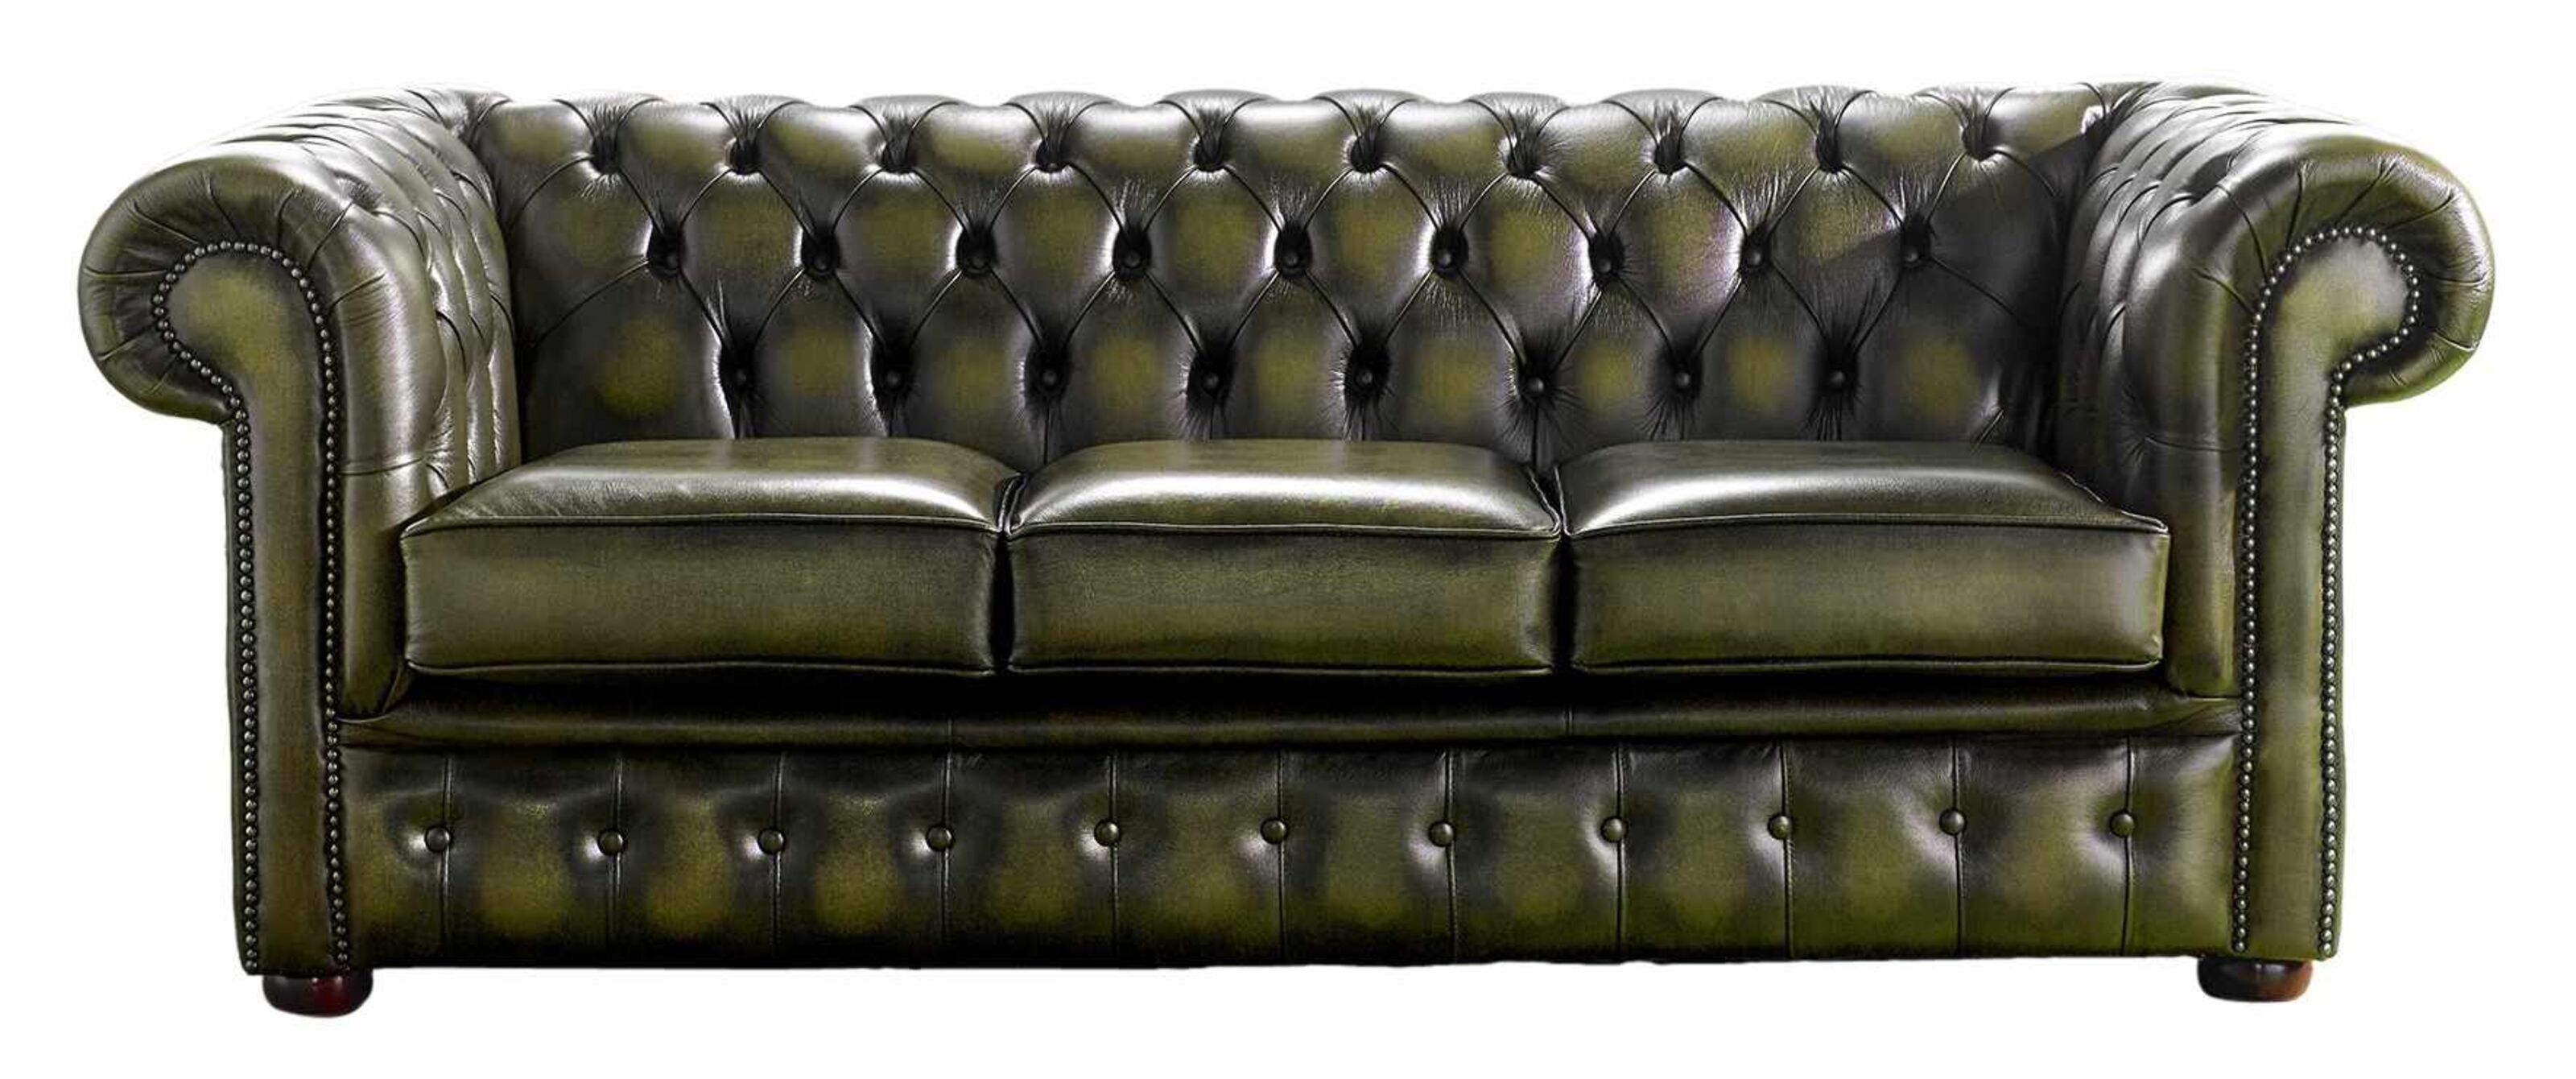 Discerning the Genuine Charm of a Chesterfield Sofa  %Post Title